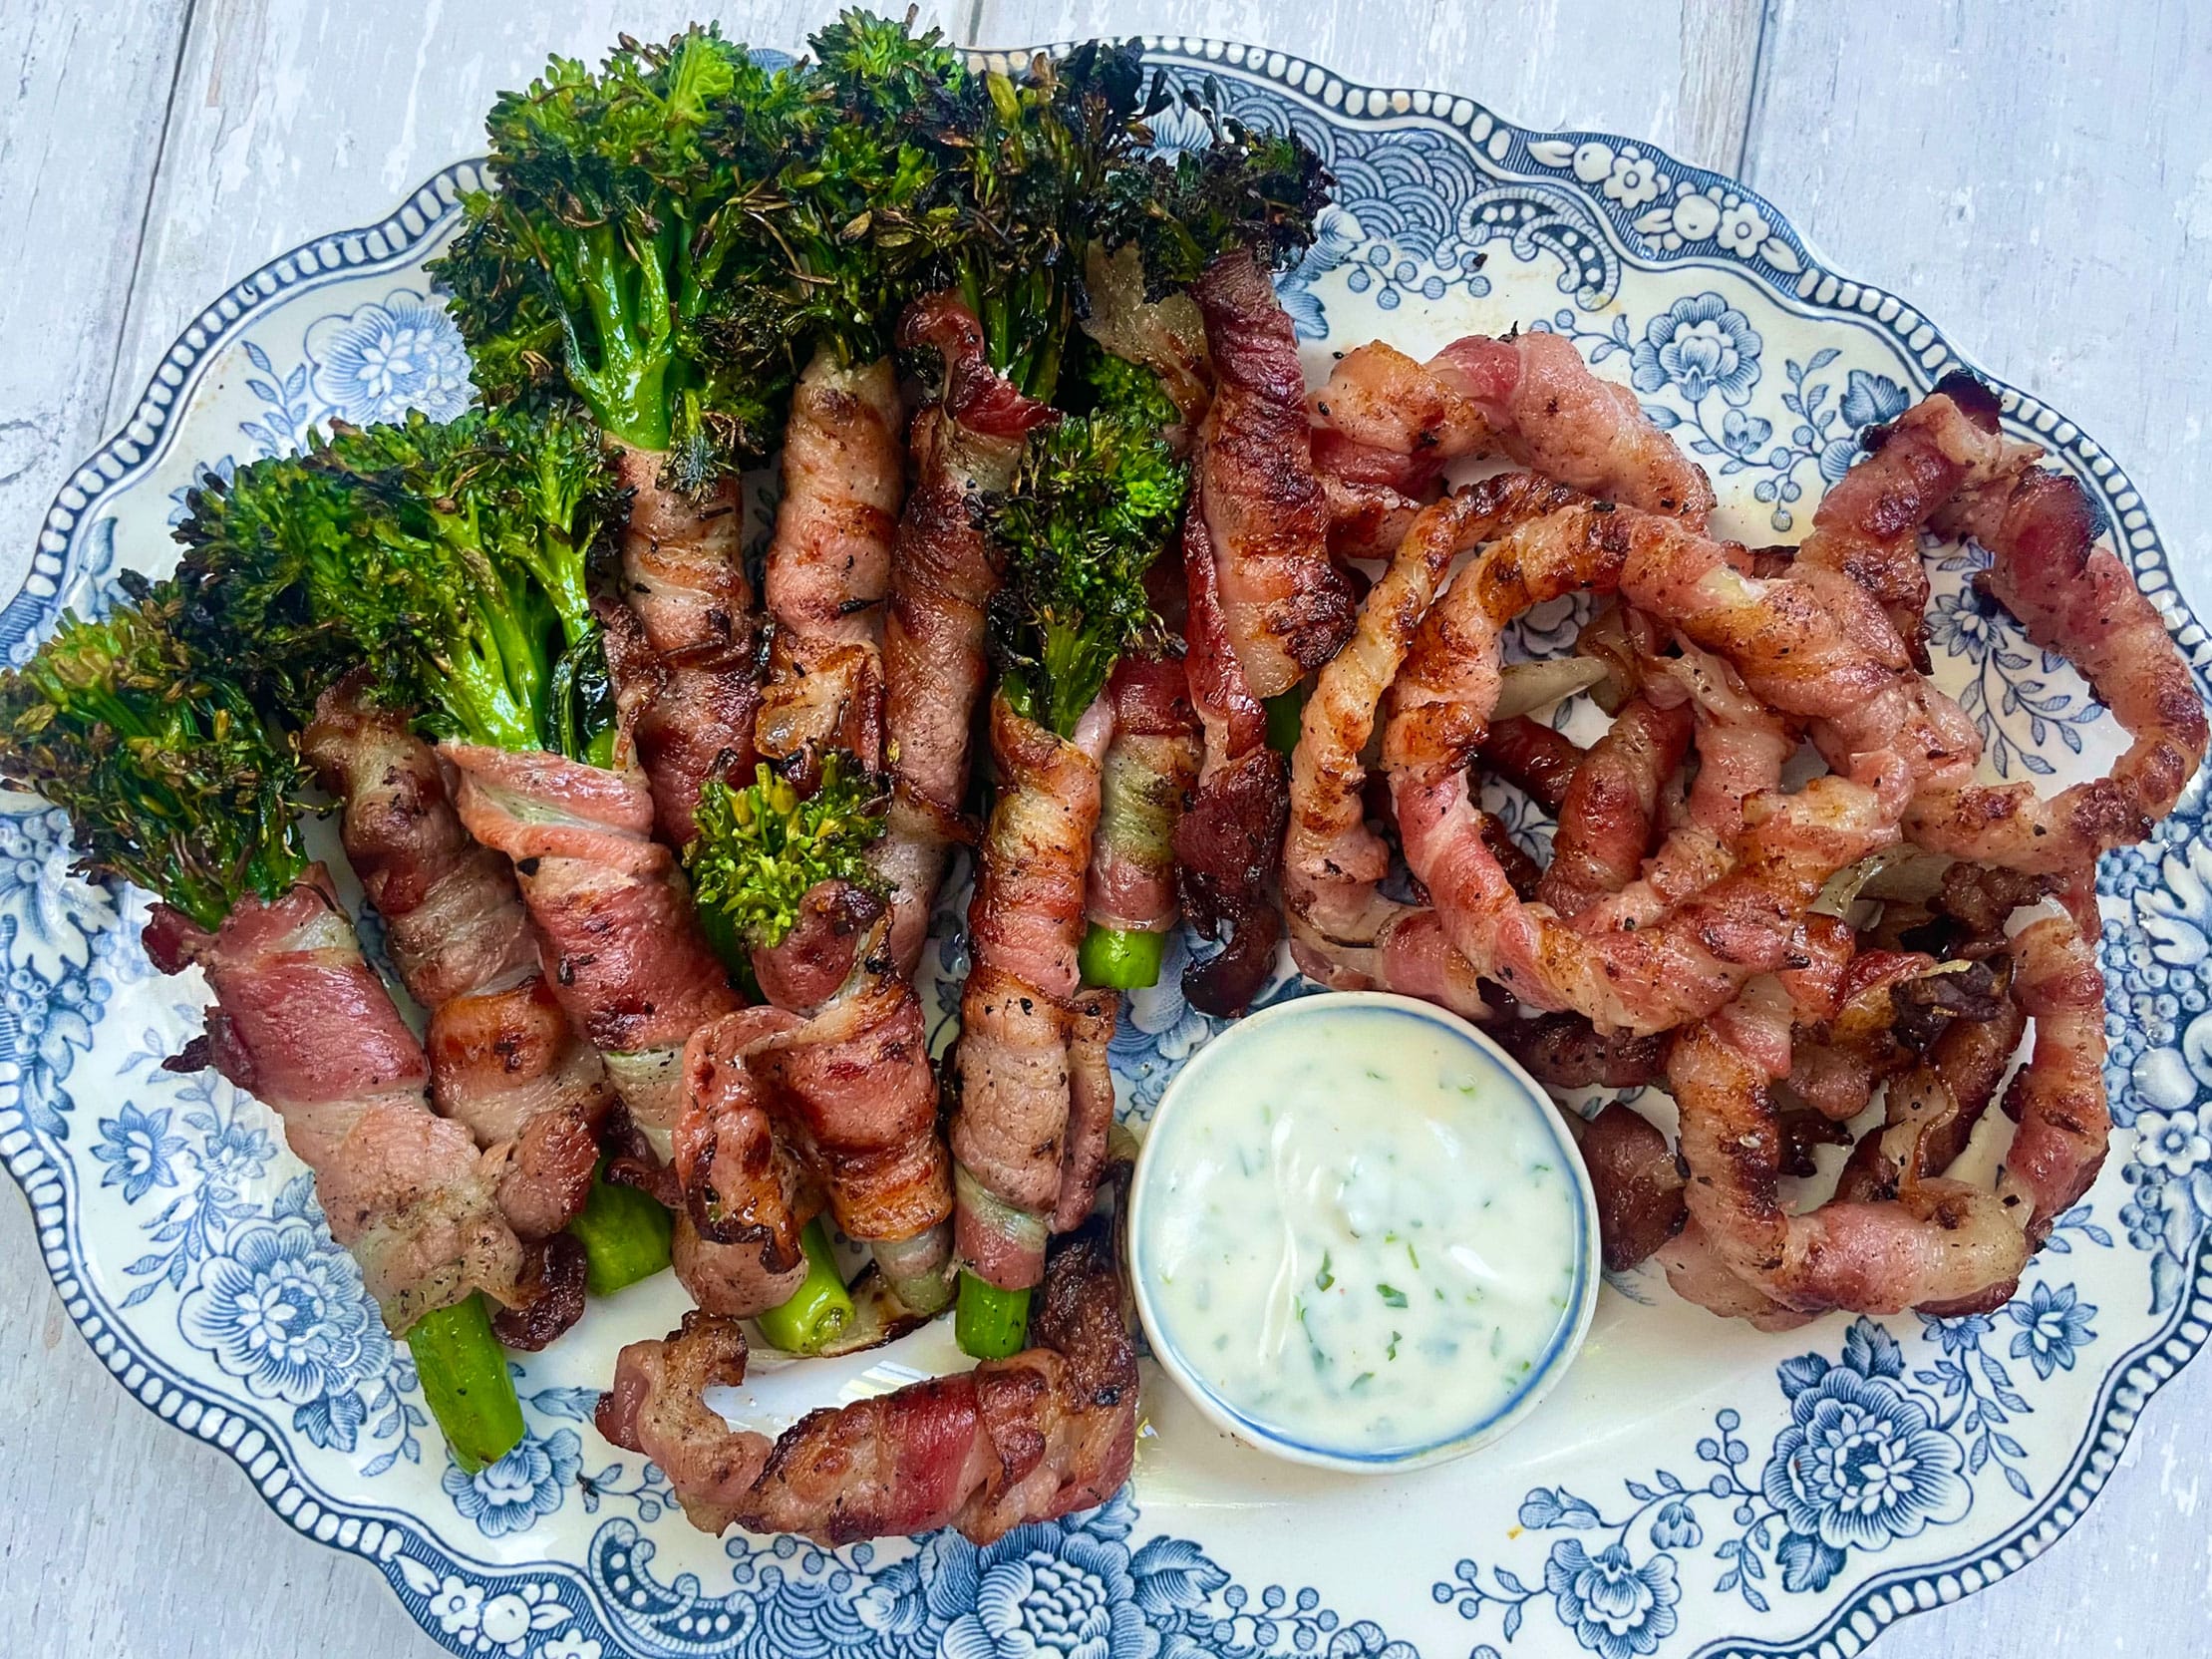 Bacon Wrapped Onion Rings and Tenderstem Broccoli with Ranch Dip